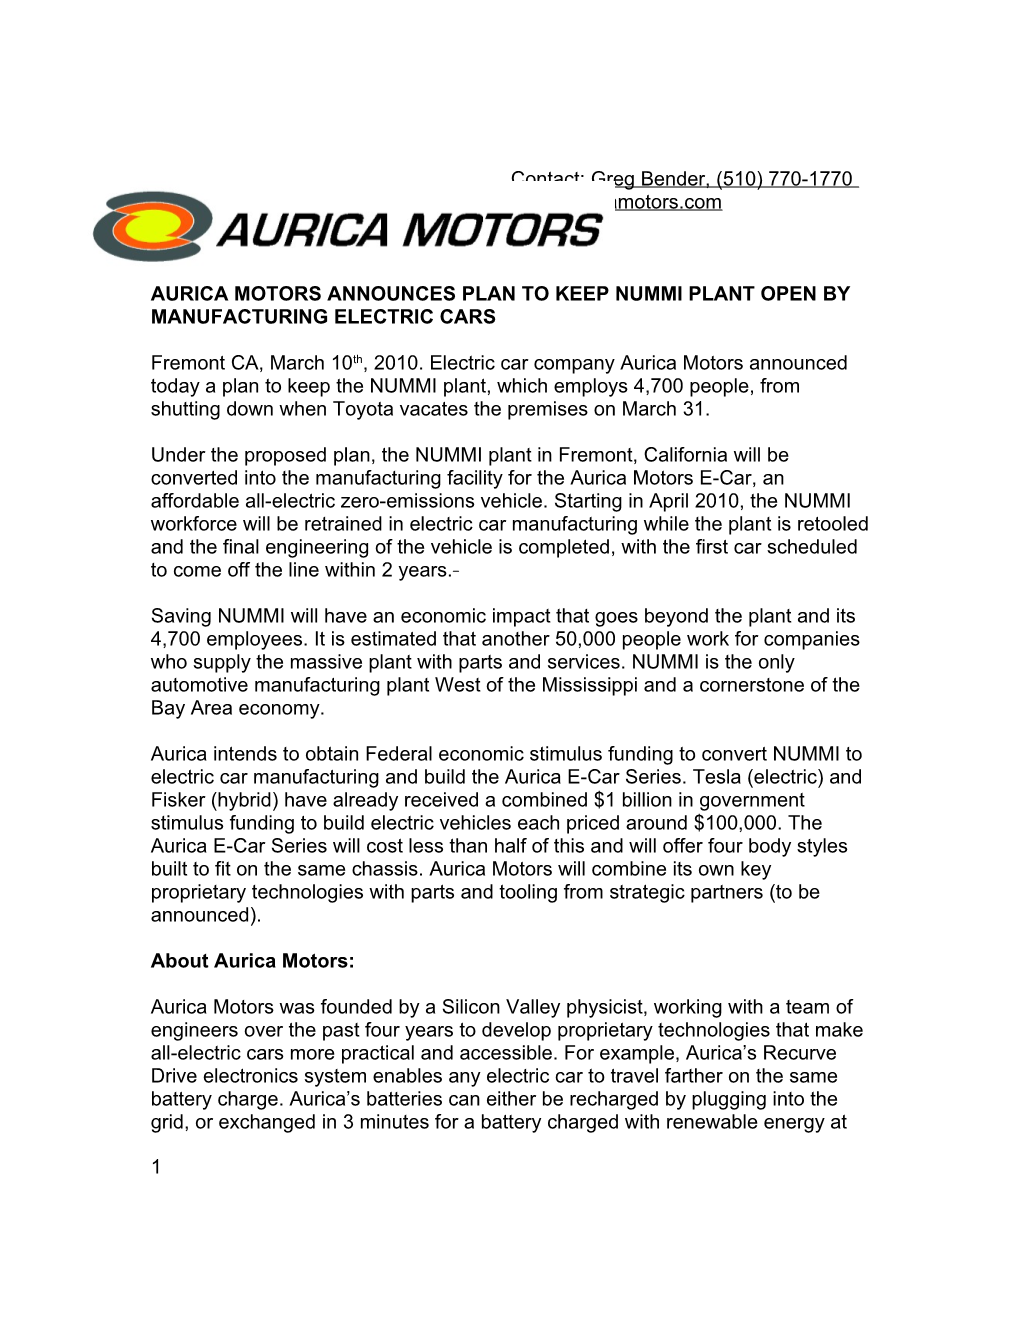 Aurica Motors Announces Plan to Keep Nummi Plant Open by Manufacturing Electric Cars